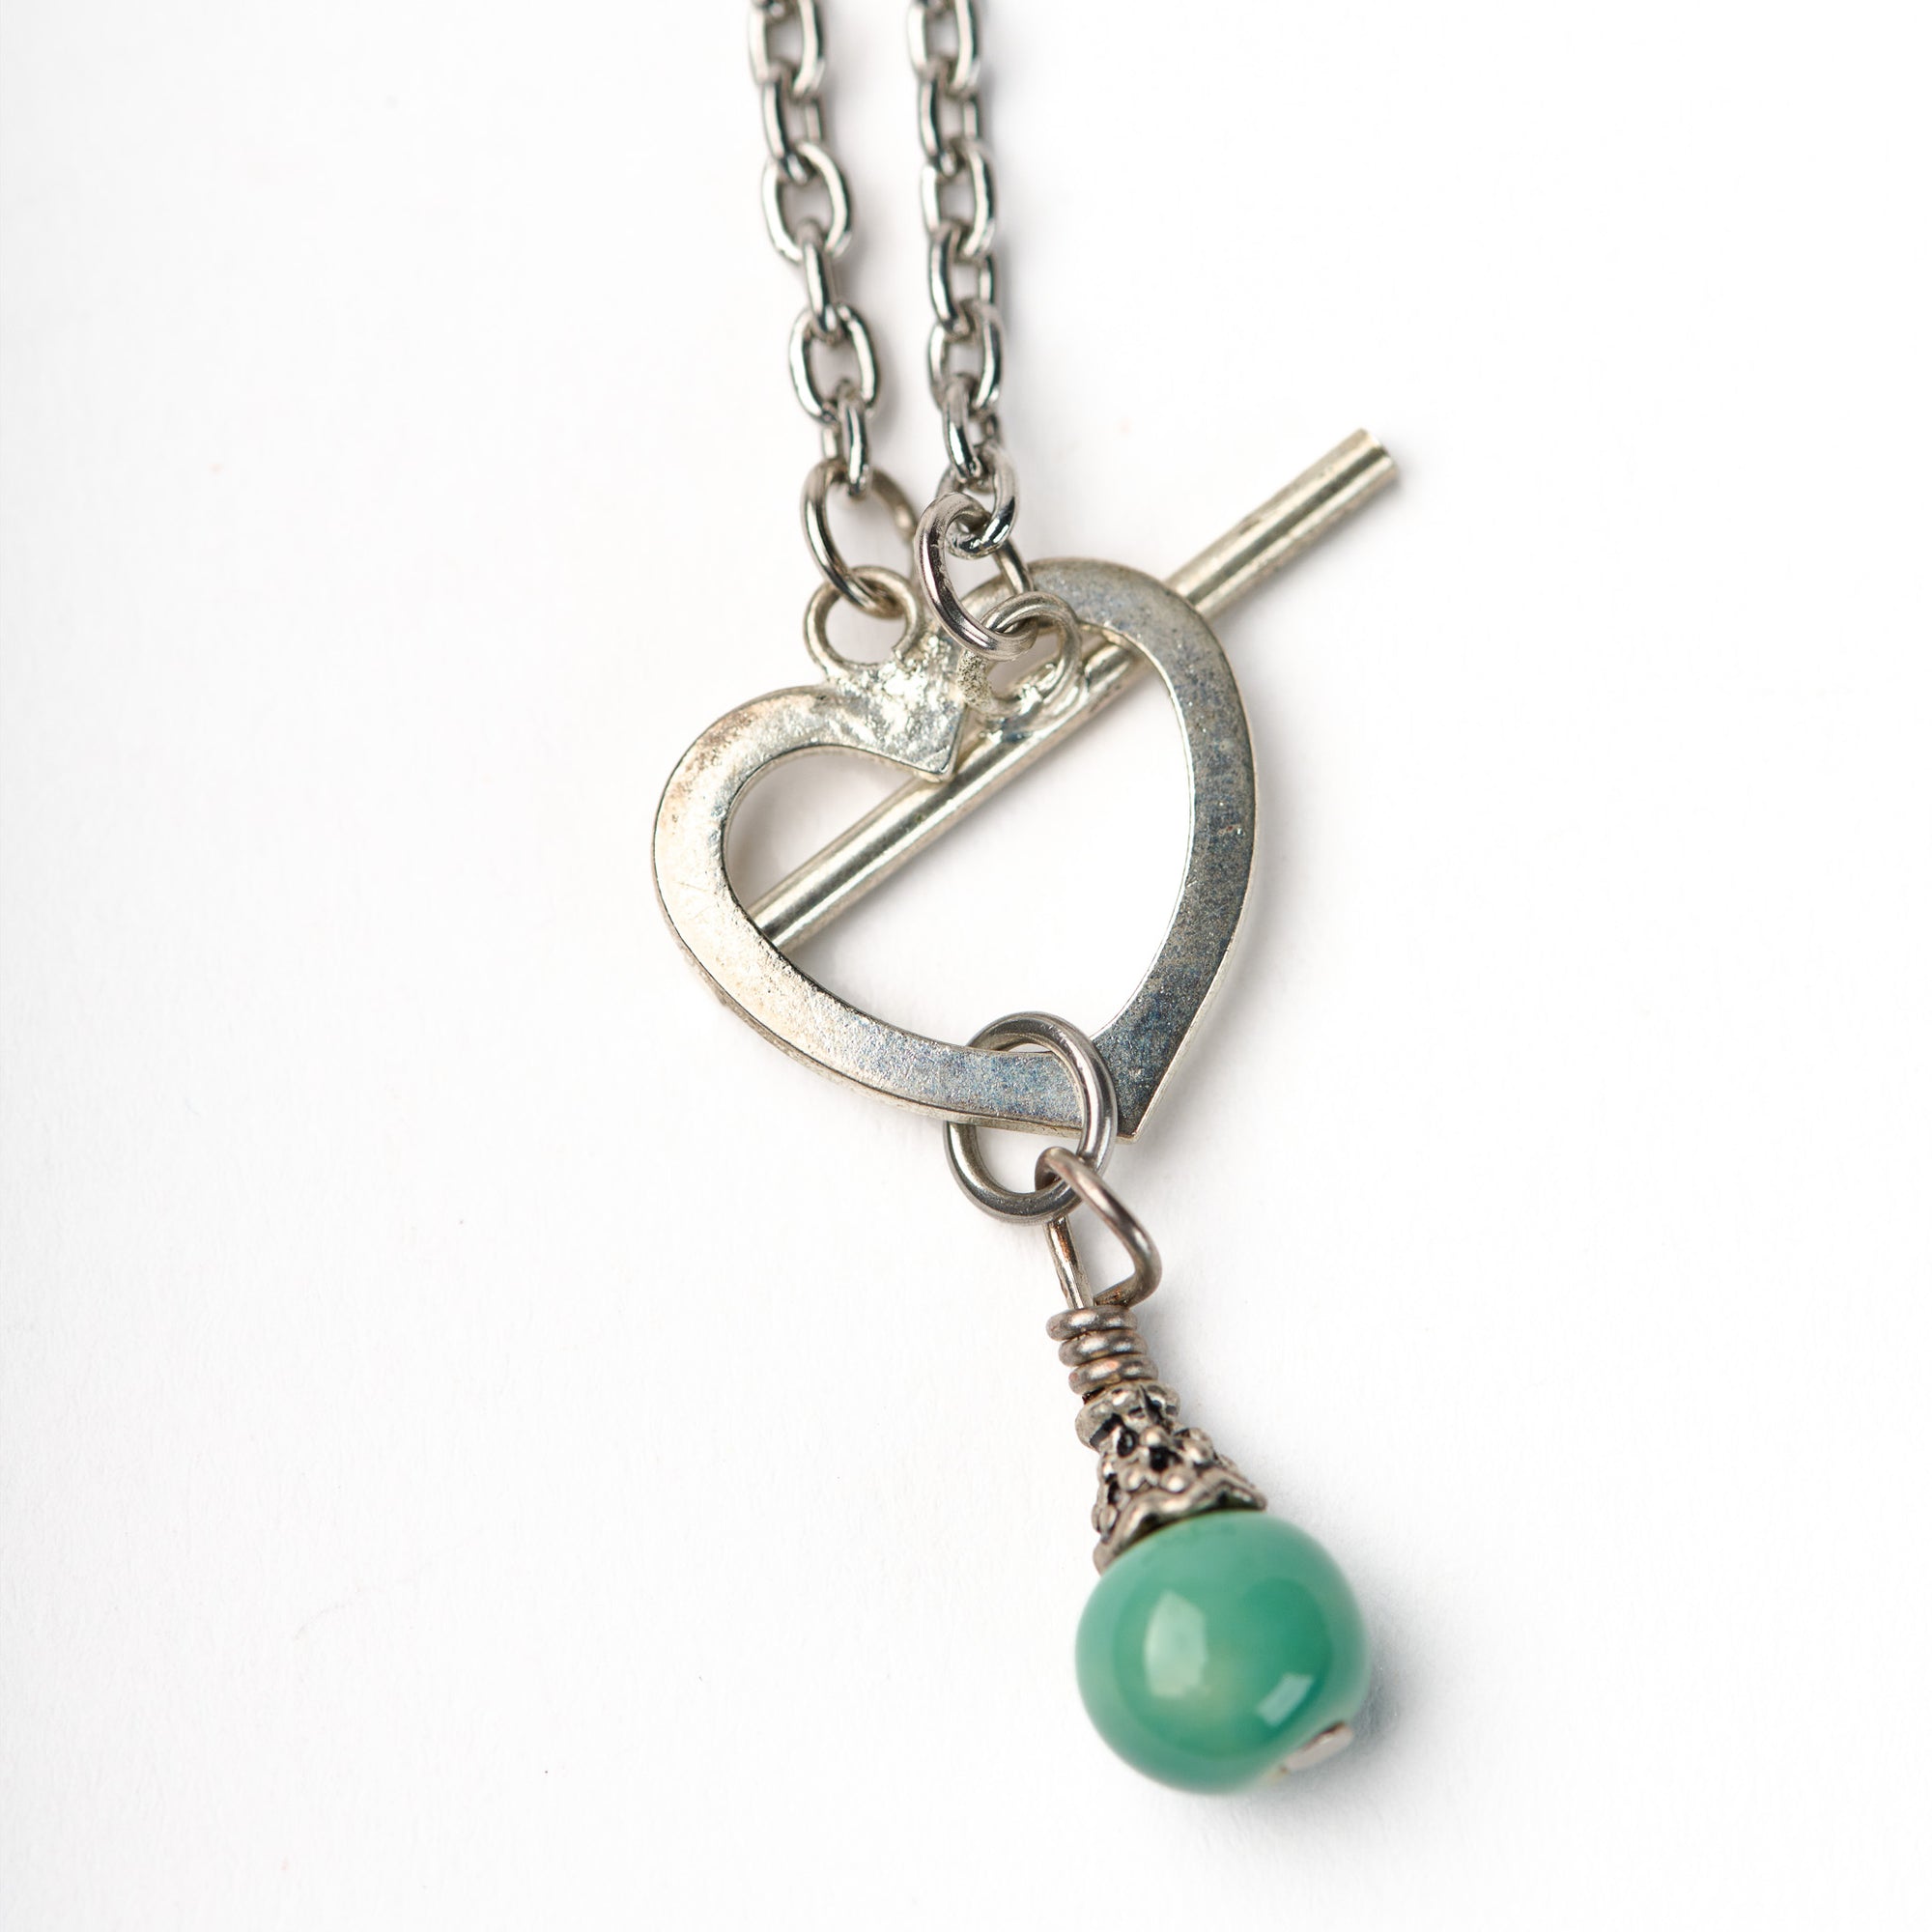 Joining Hearts Necklace